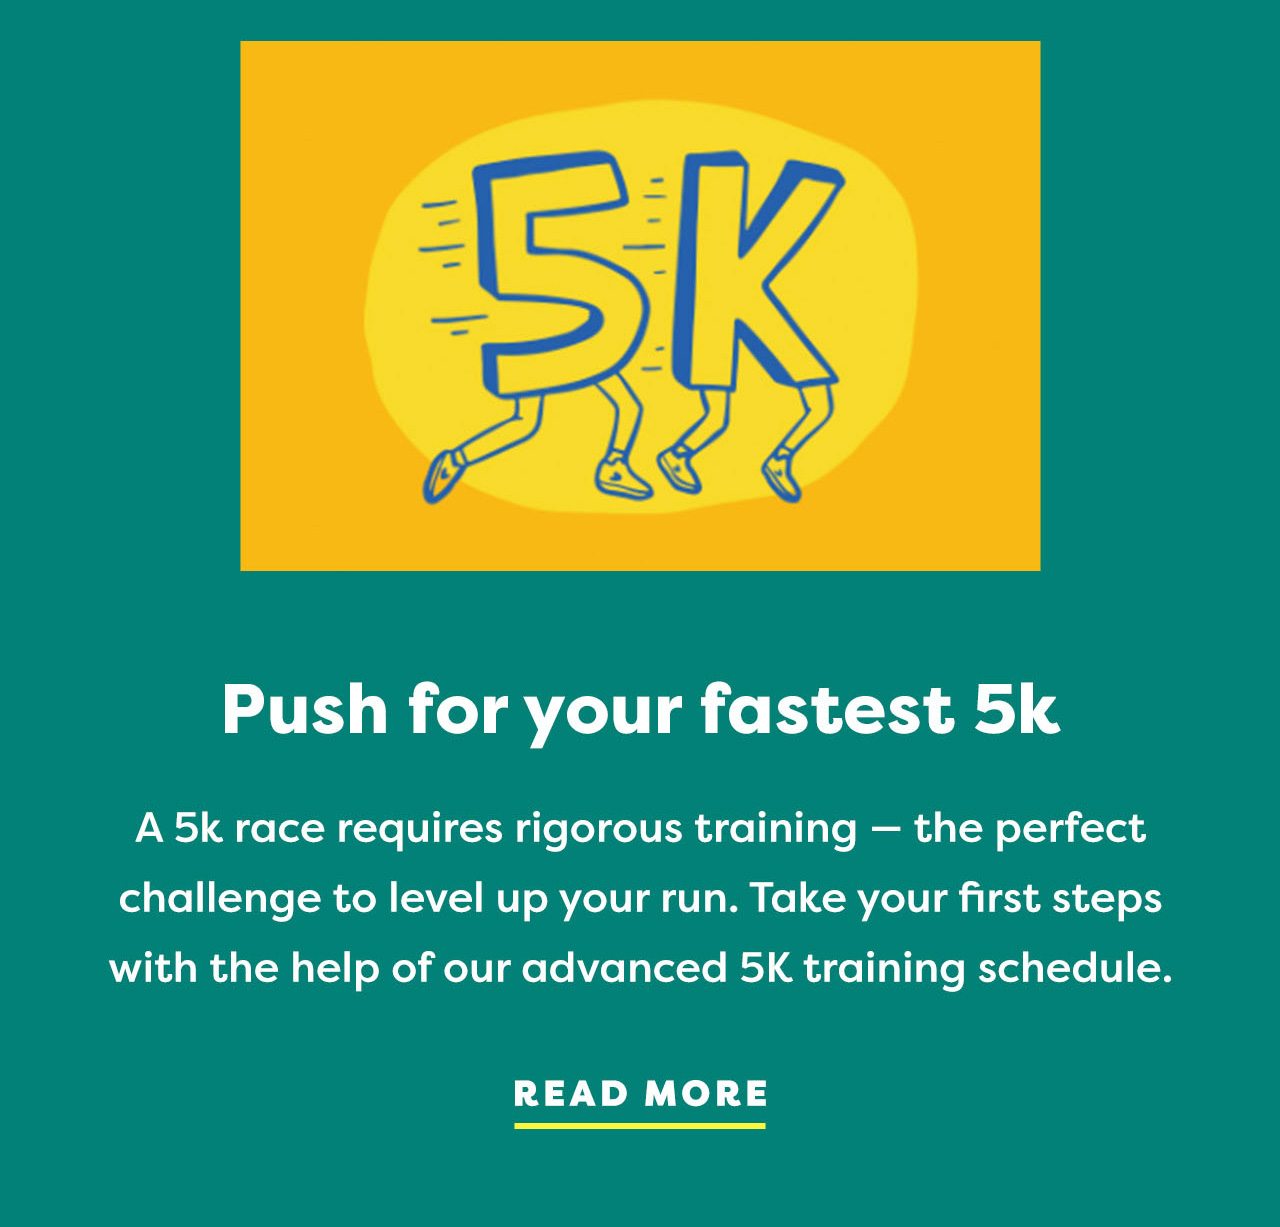 Push for your fastest 5k - A 5k race require rigorous training - the perfect challenge to level up your run. Take your first steps with the help of our advanced 5K training schedule. | Read more